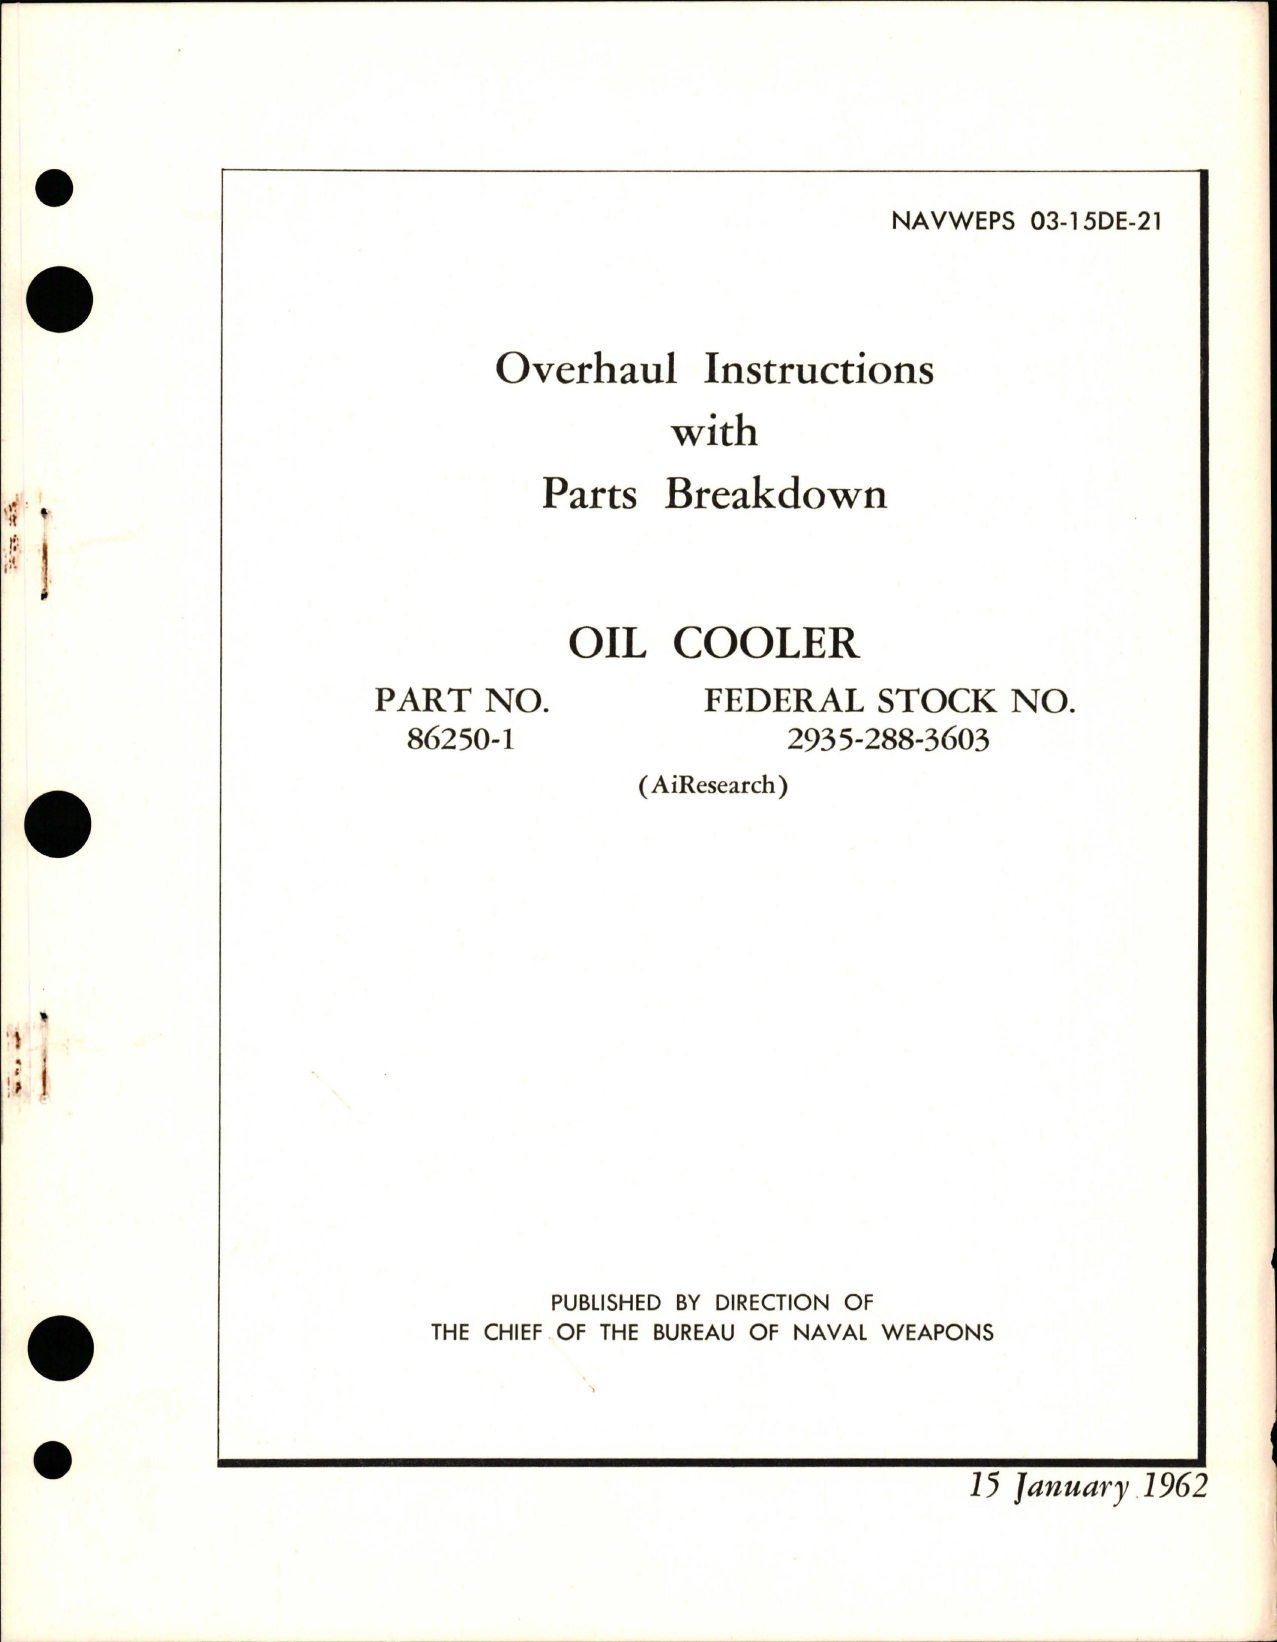 Sample page 1 from AirCorps Library document: Overhaul Instructions with Parts Breakdown for Oil Cooler - Part 86250-1